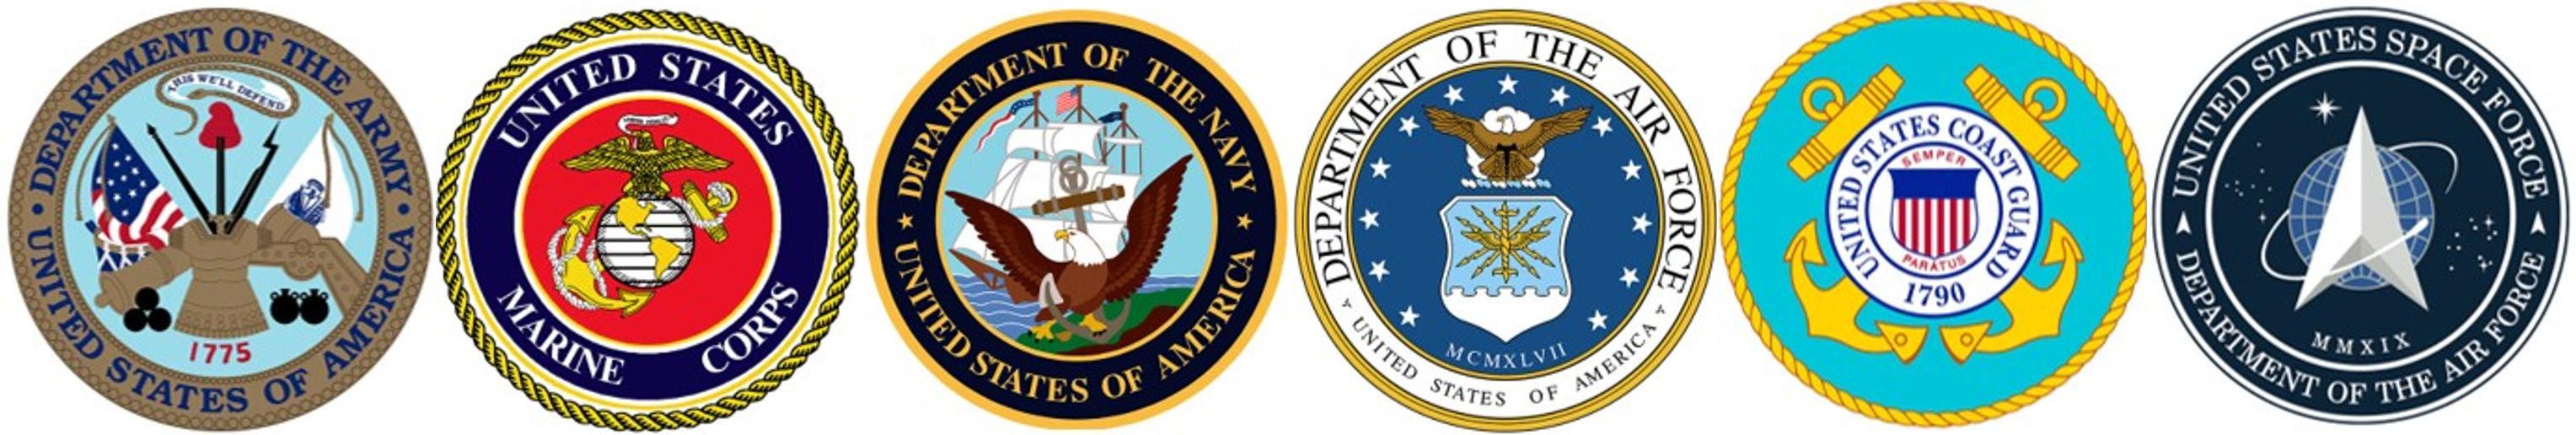 Seals of American Armed Forces